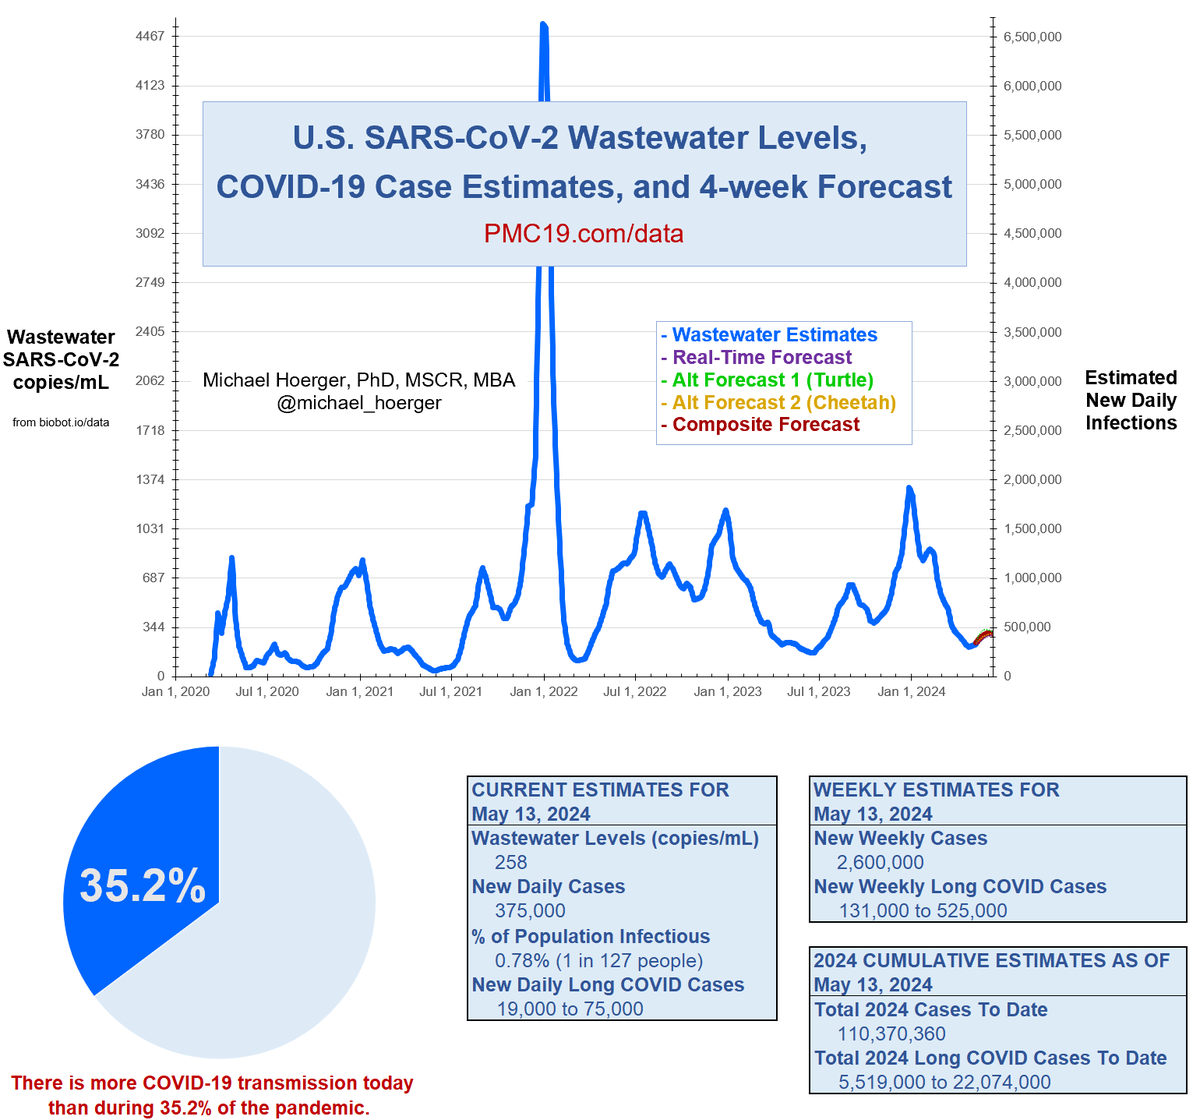 PMC COVID-19 Forecast, May 13, 2024 (U.S.) Expect transmission to hover around 350,000-500,000 infections/day through mid-July. Transmission has increased the past 2 weeks. Now we have some clarity on the forecast (red line). It looks like we should fall short of the 500K mark…